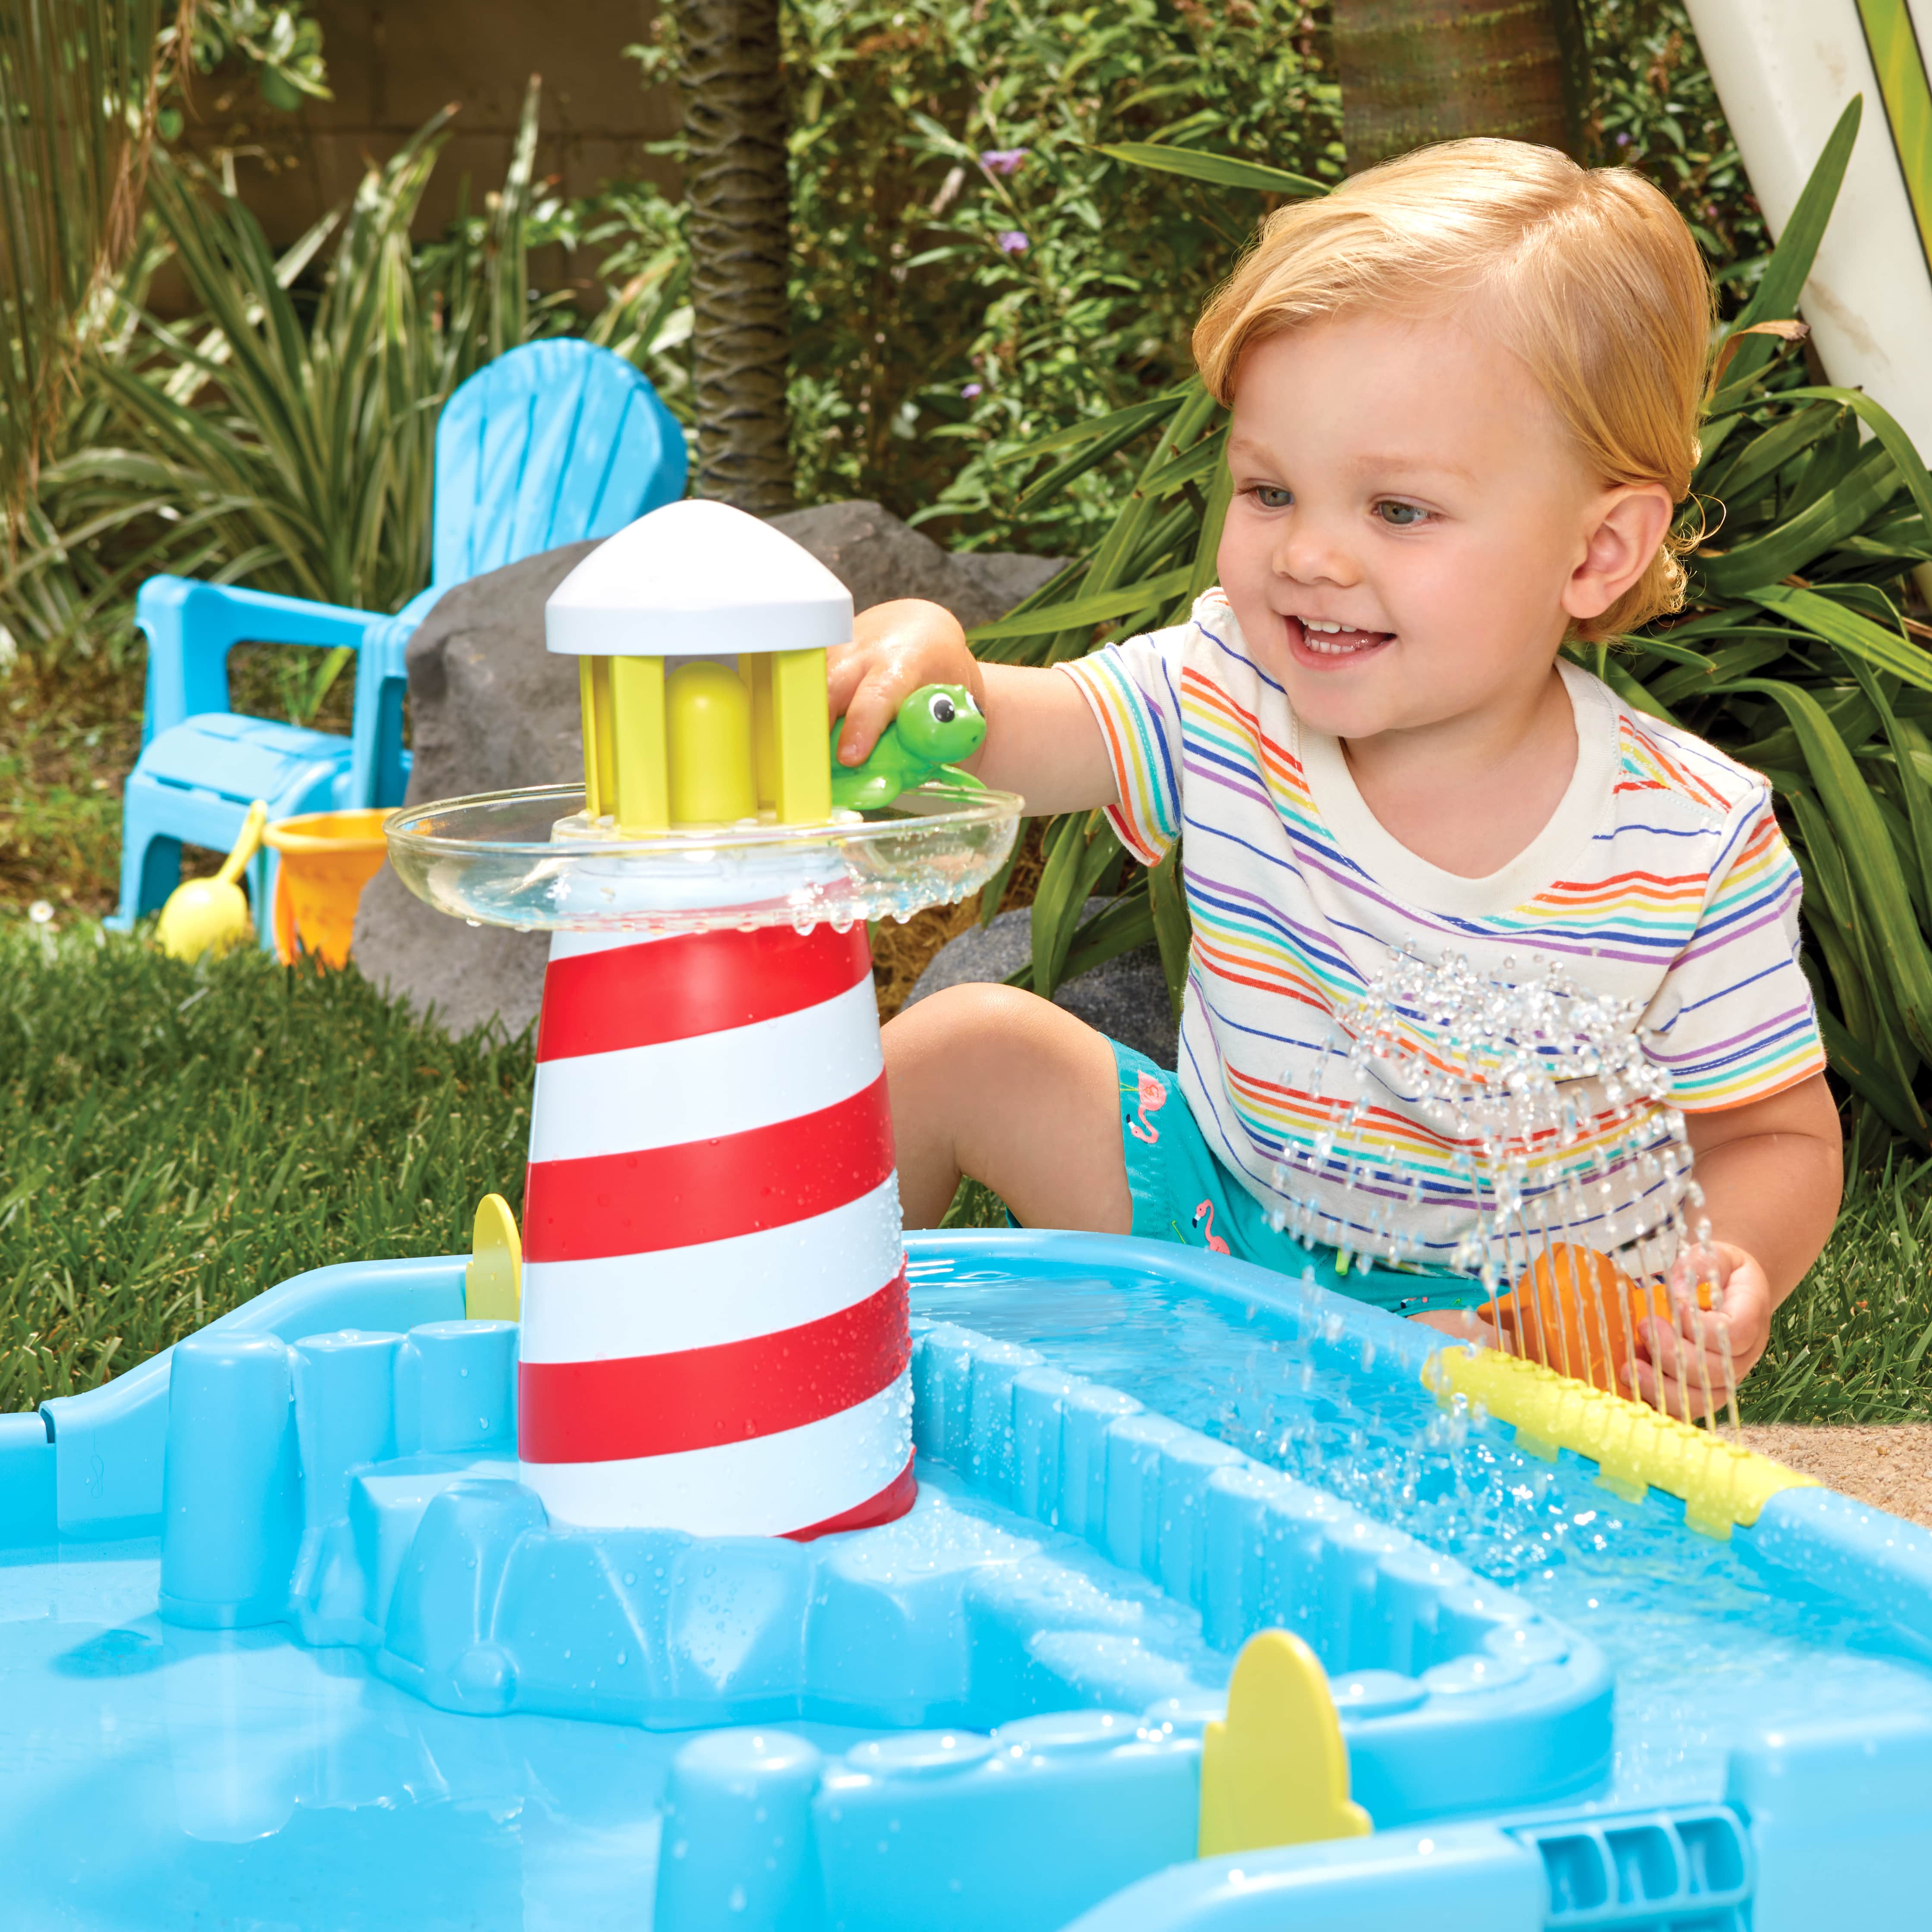 Little Tikes Splash Beach Water Table Splash Pad for Kids, Boys, Girls Ages 2+ Years - image 5 of 7